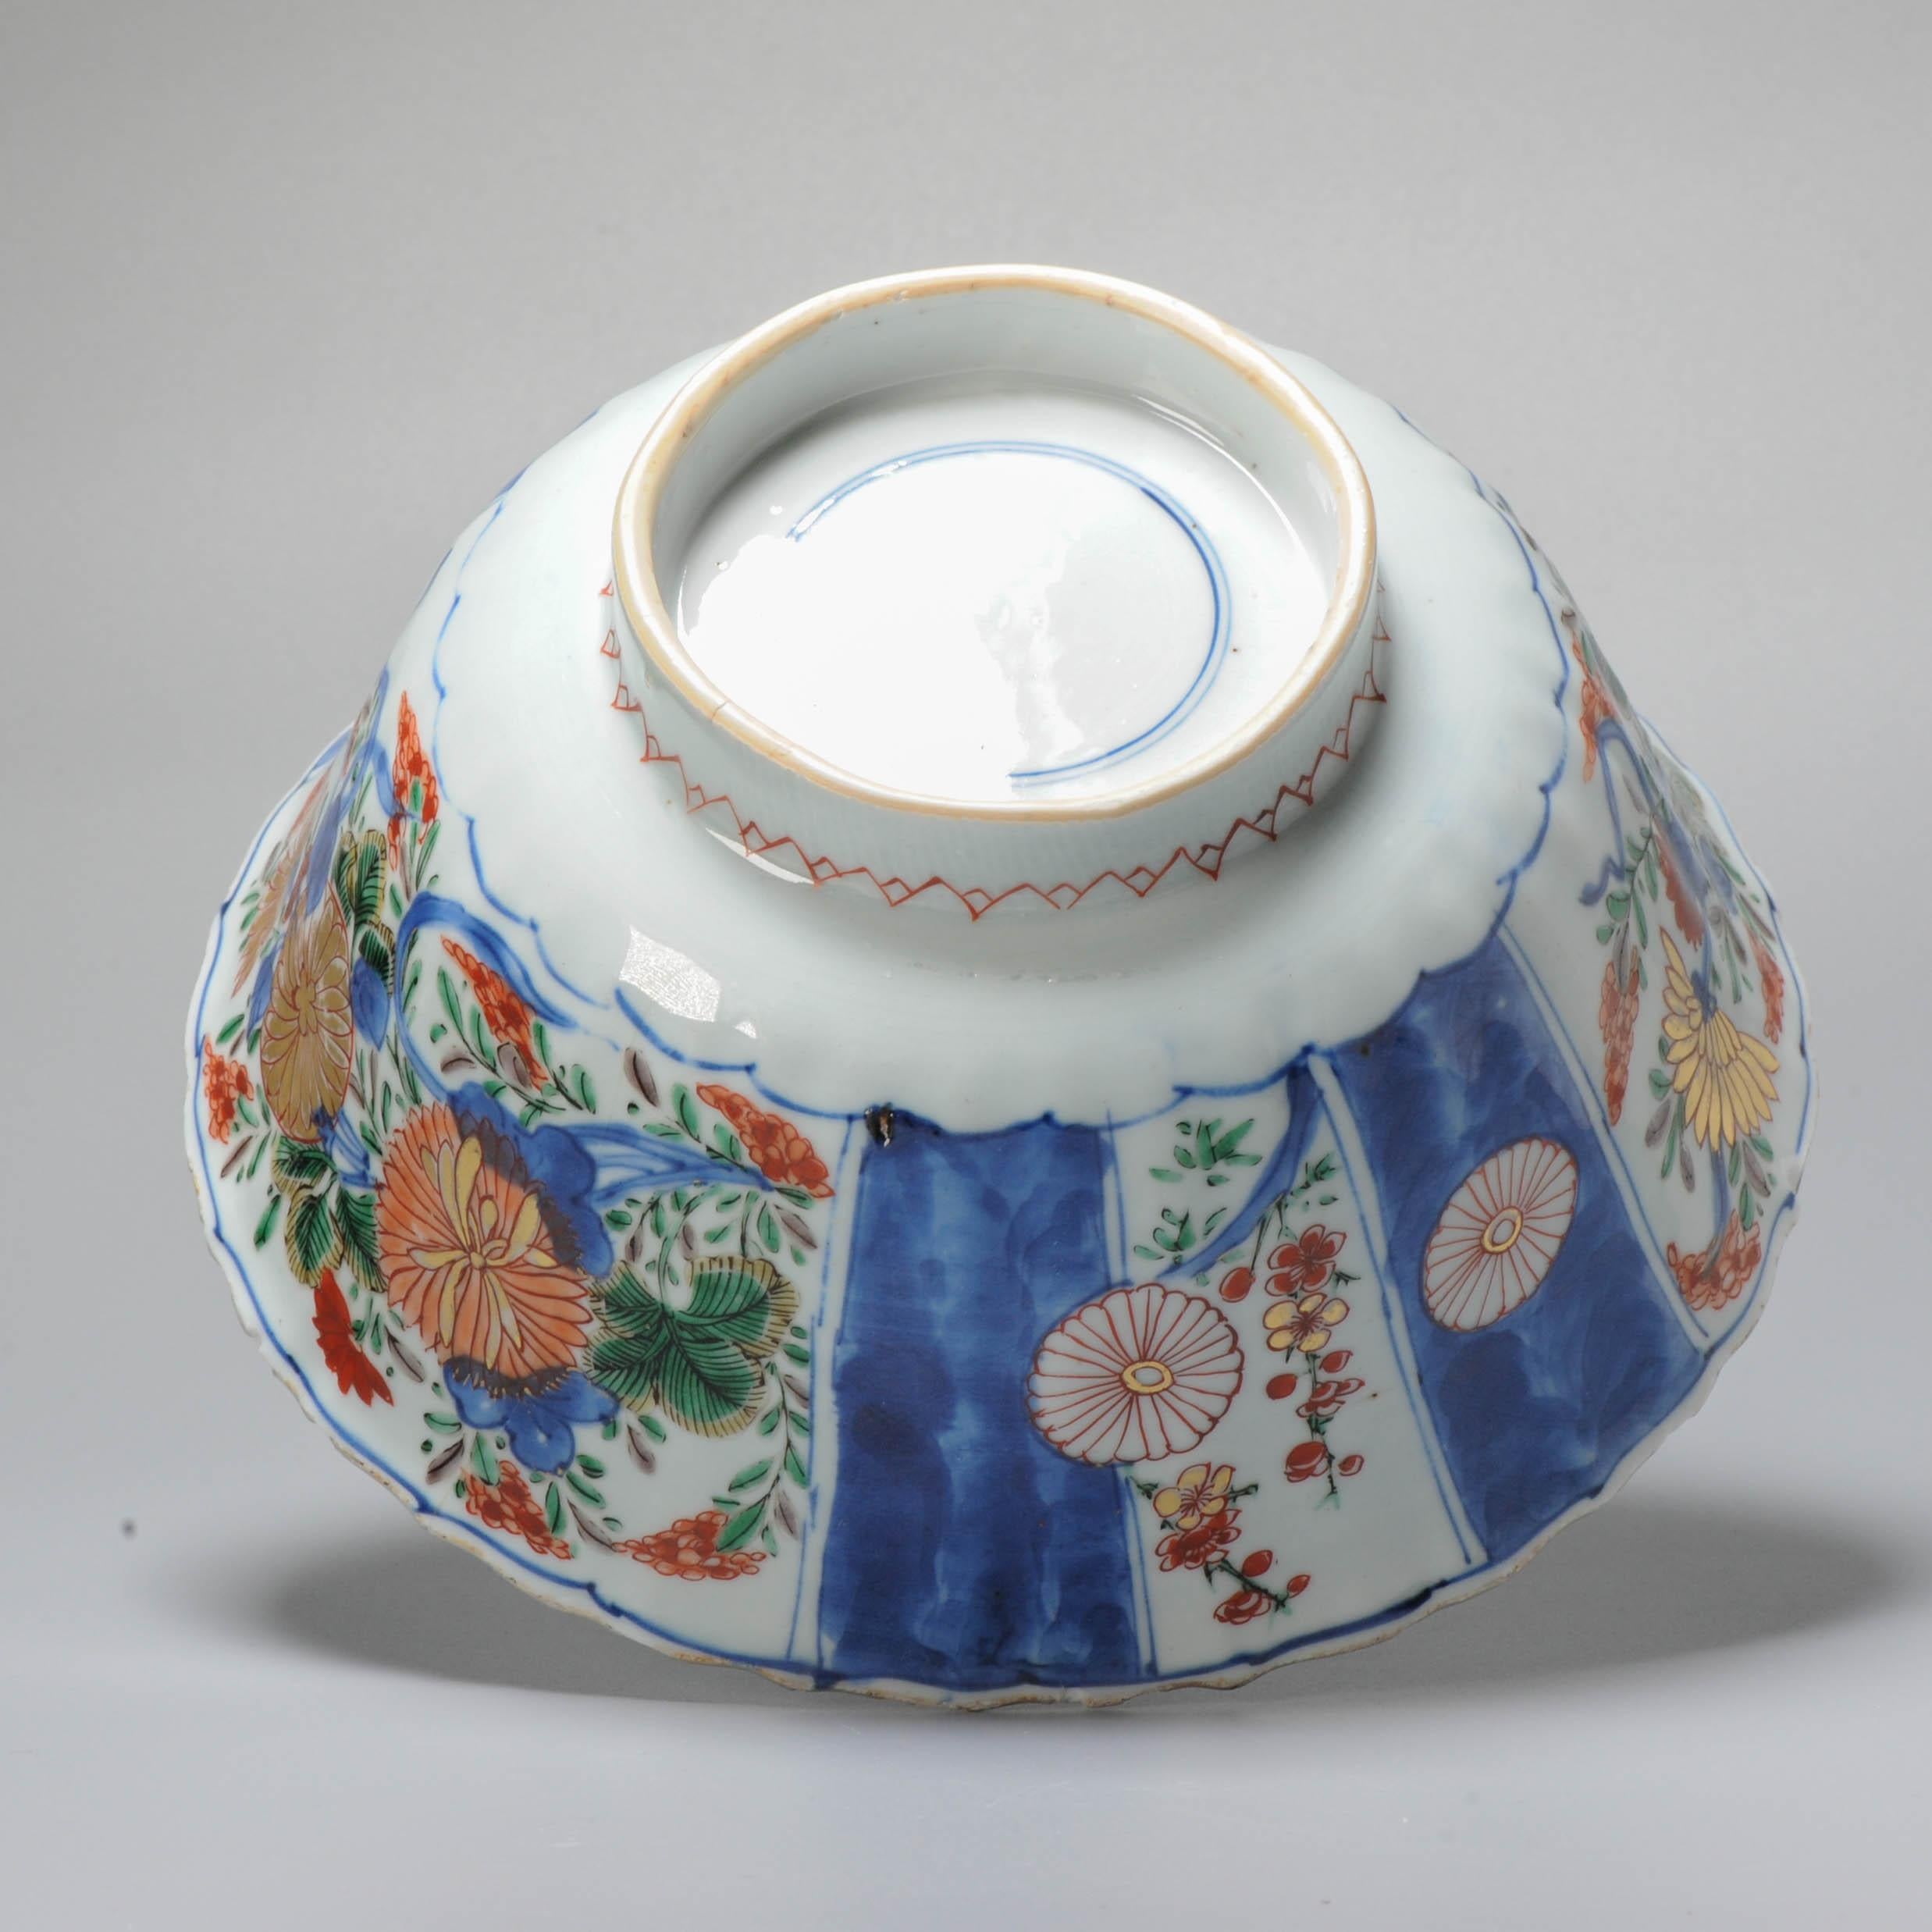 Large Bowl Kangxi Antique Chinese Porcelain Imari Verte, 18 C In Excellent Condition For Sale In Amsterdam, Noord Holland